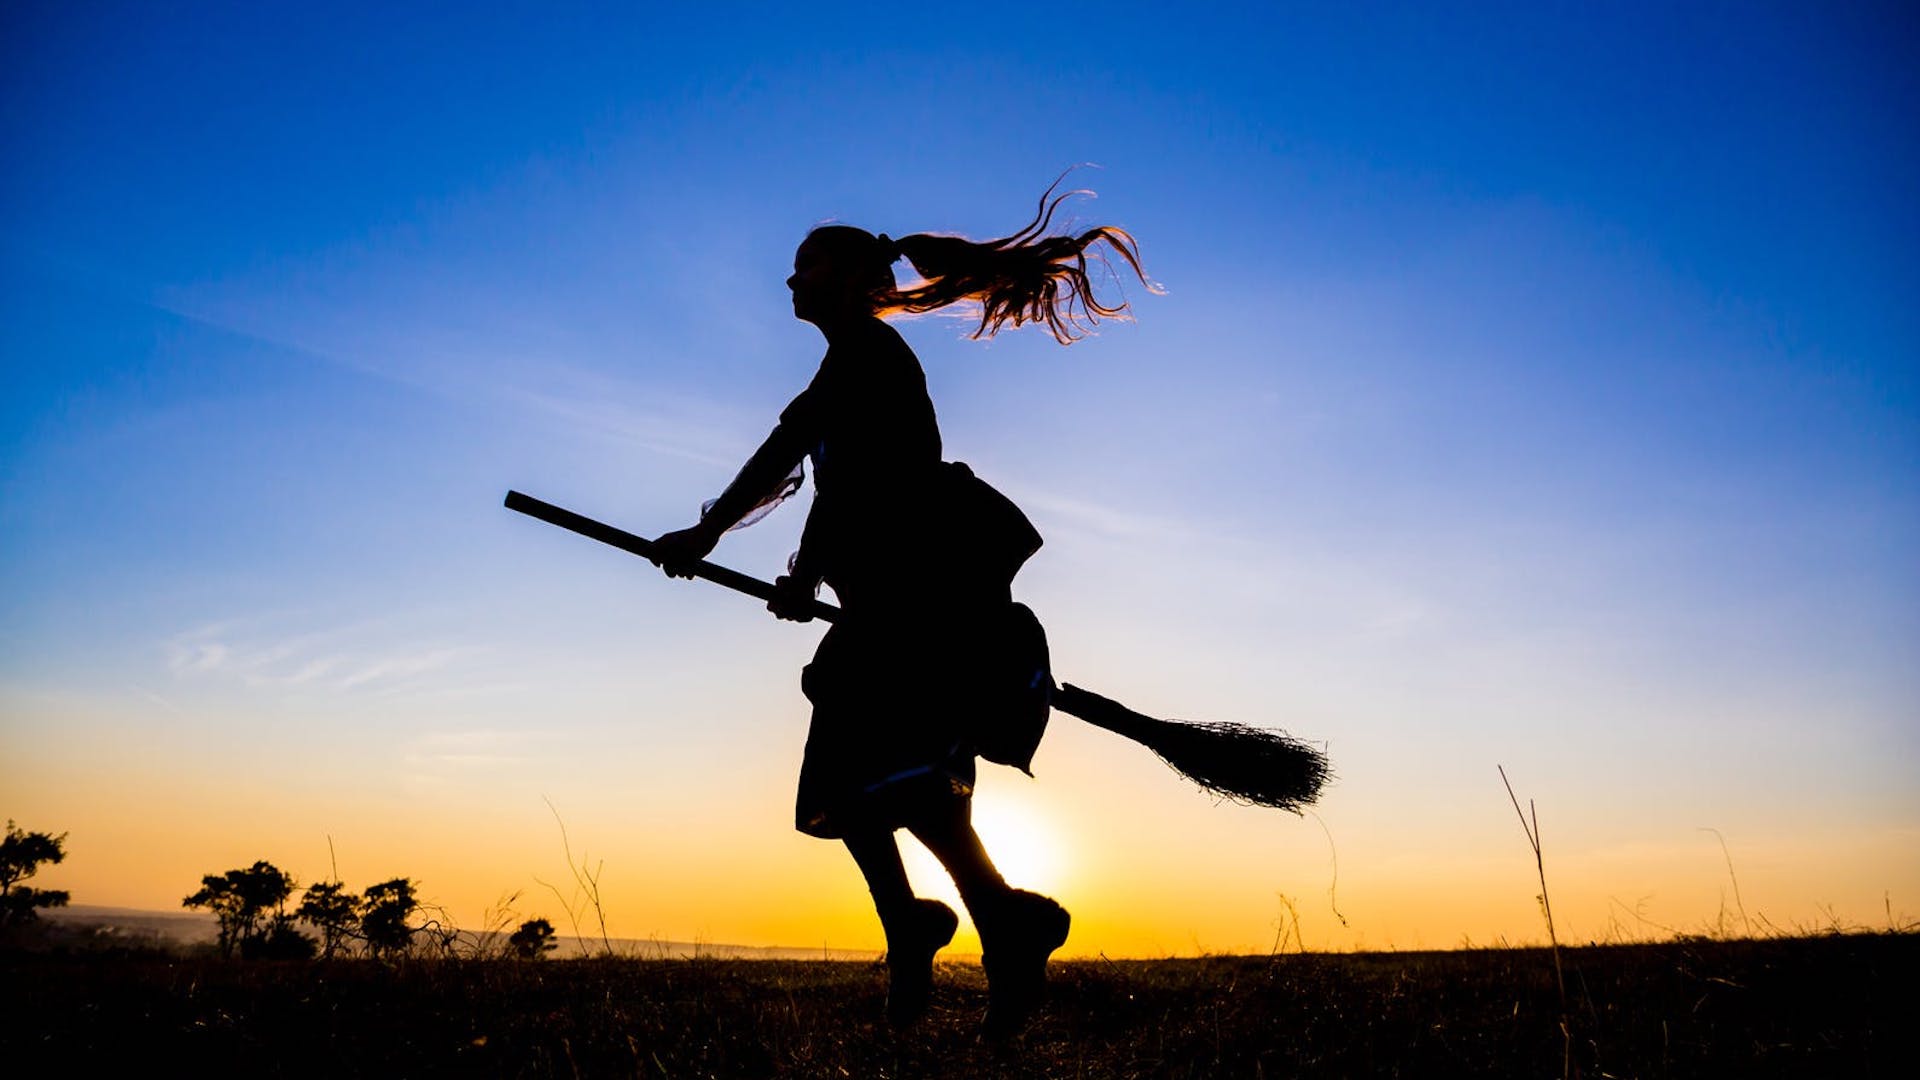 A girl flying on a broomstick